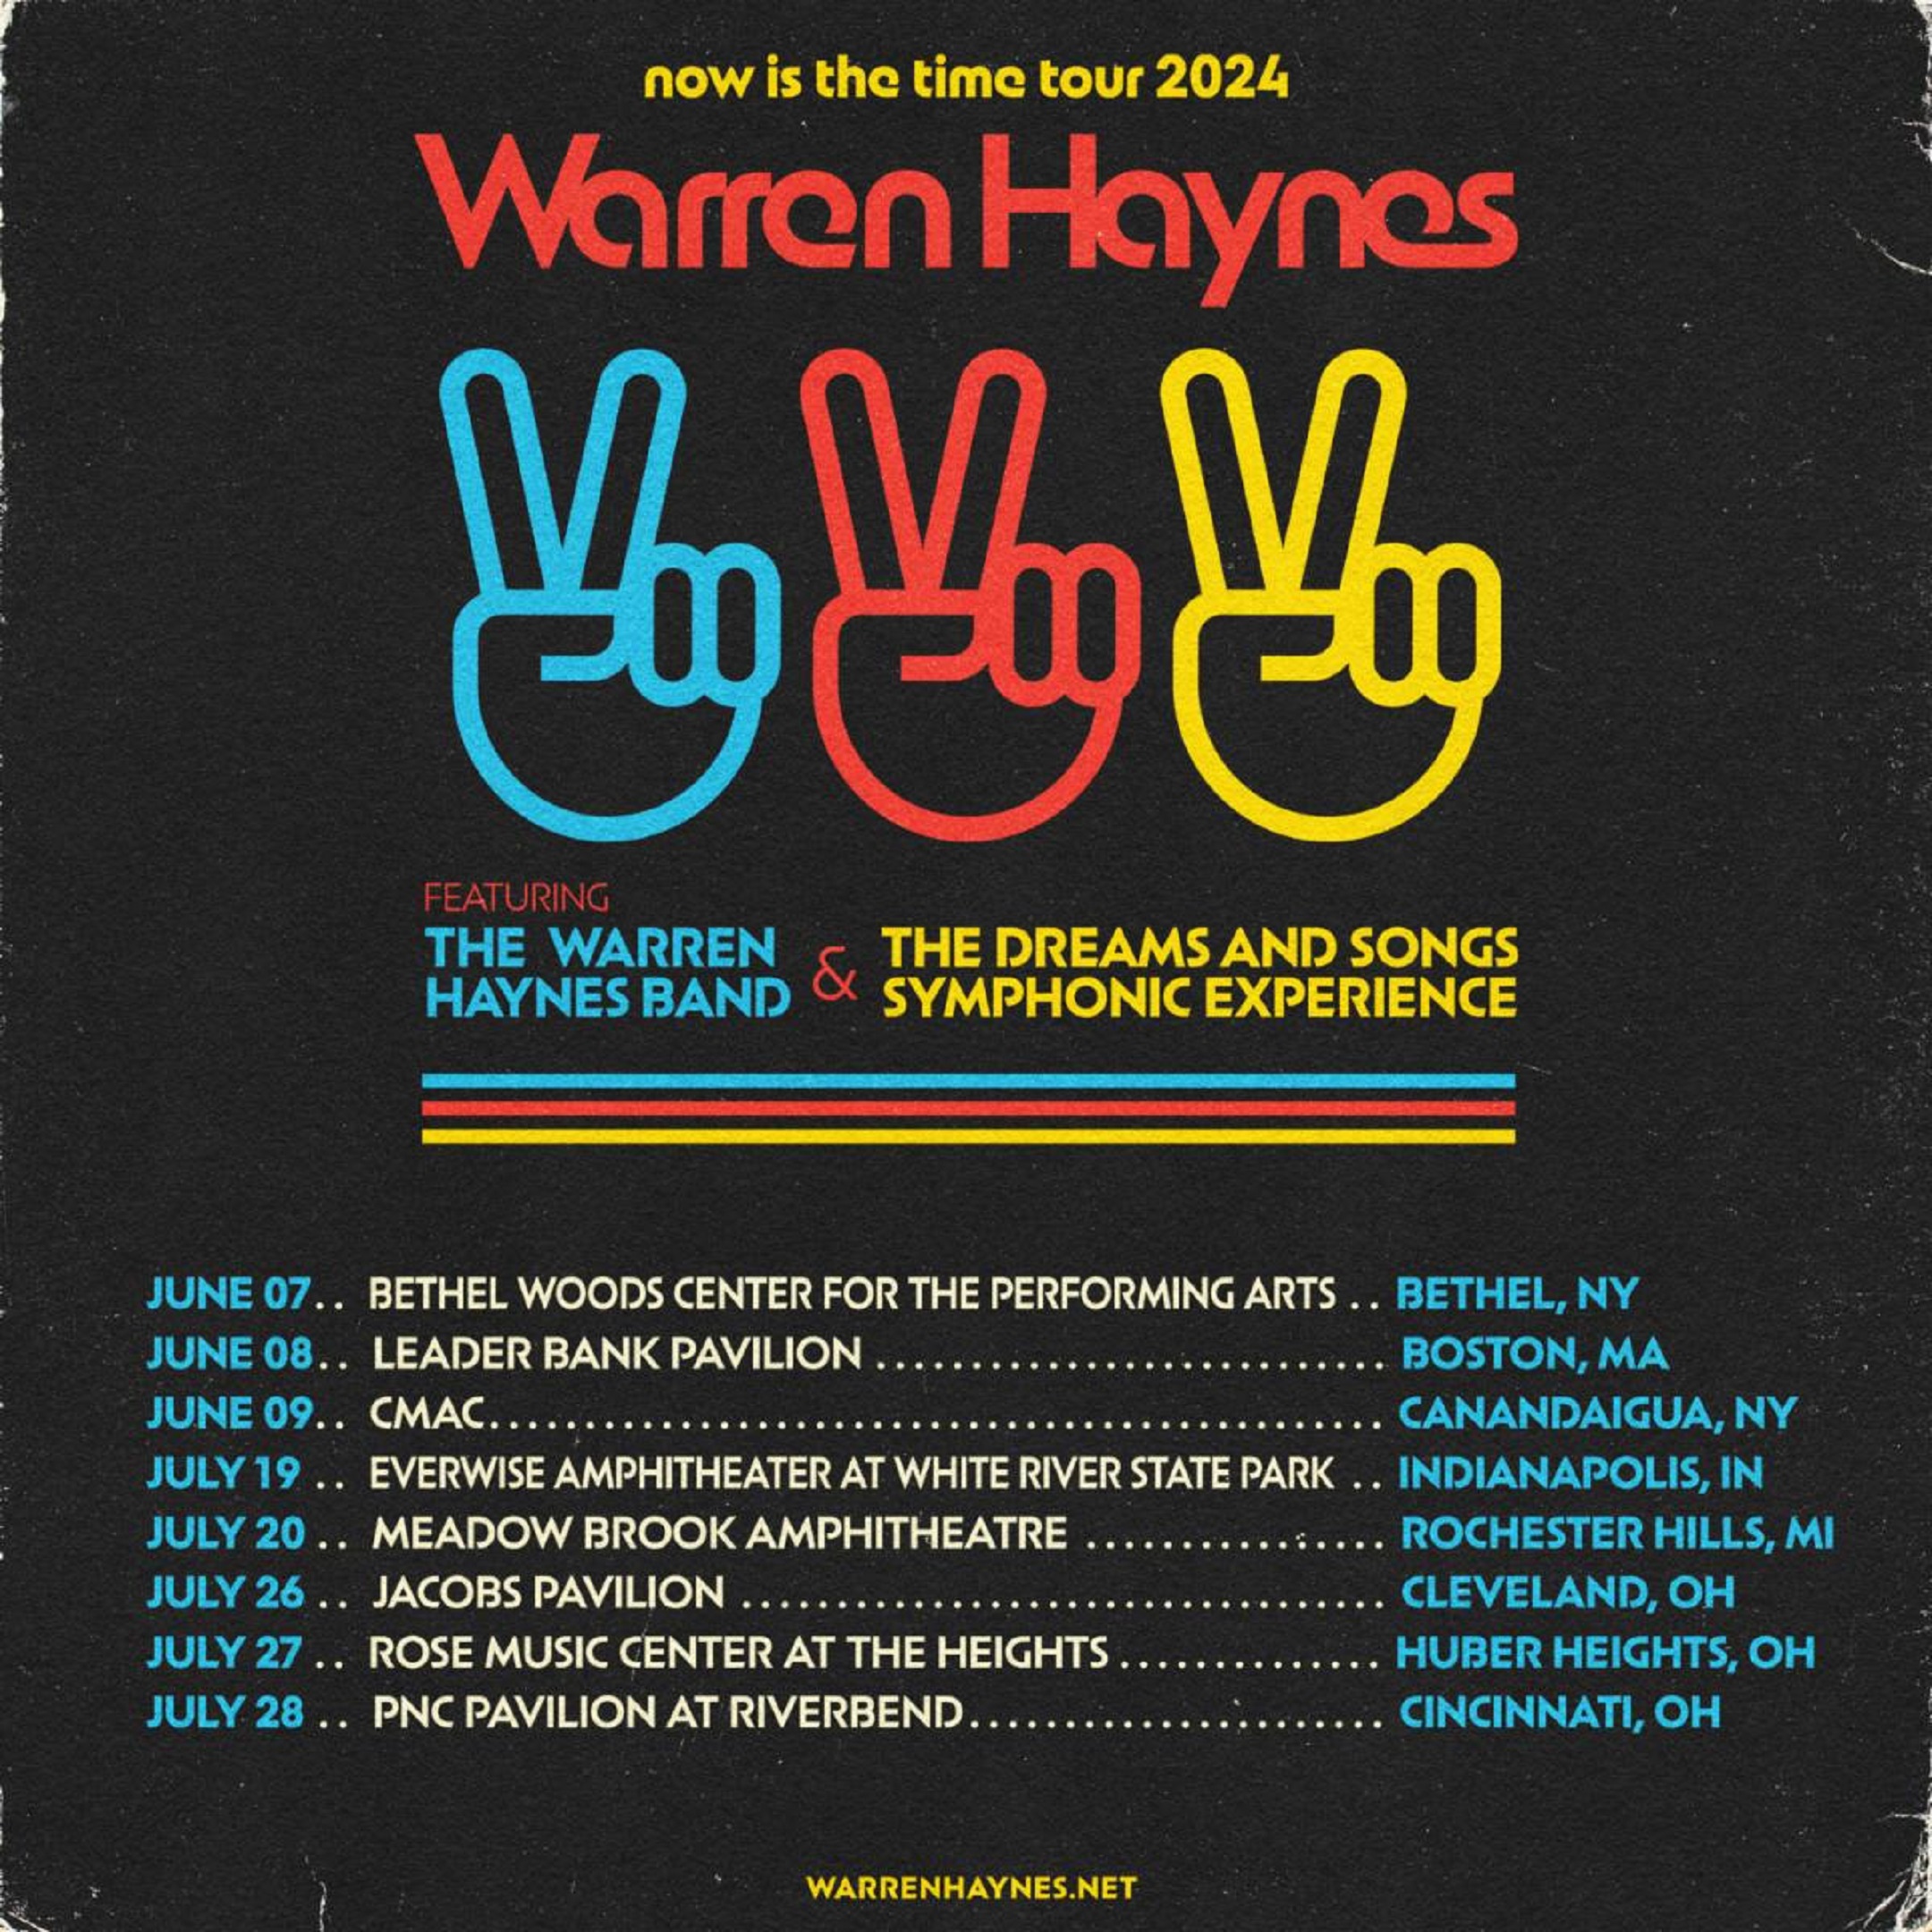 Warren Haynes Announces 5 Additional Dates for Now Is The Time Tour featuring The Warren Haynes Band & The Dreams and Songs Symphonic Experience